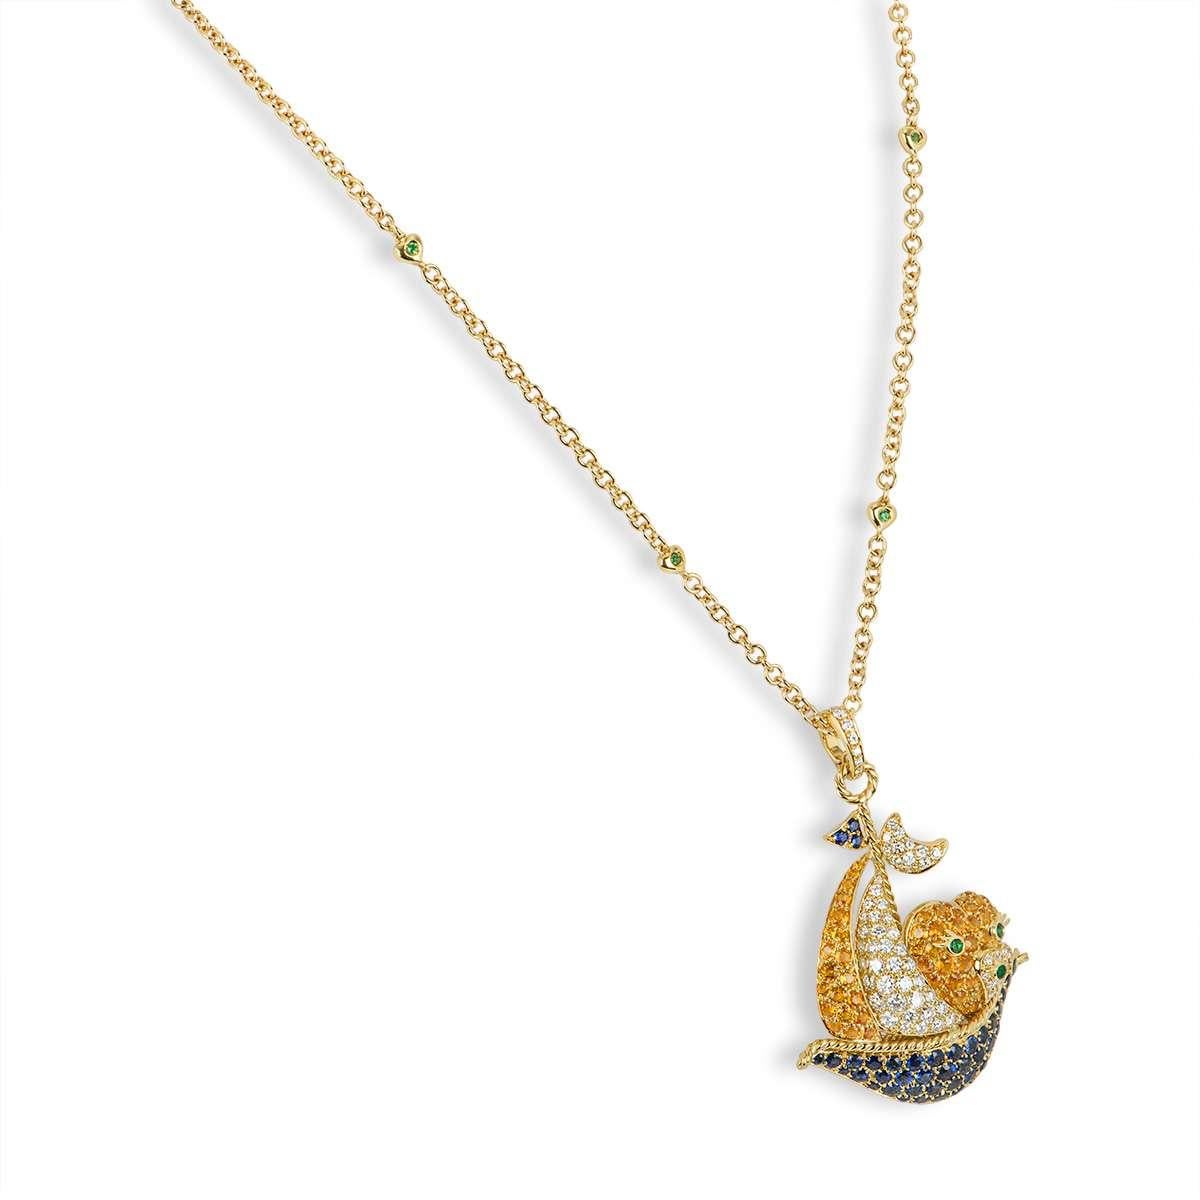 An 18k yellow gold sapphire, emerald and diamond pendant. The pendant features a large sailing boat motif, set with emeralds, diamonds and orange and blue sapphires. The diamonds have a total weight of approximately 1.98ct, the orange and blue